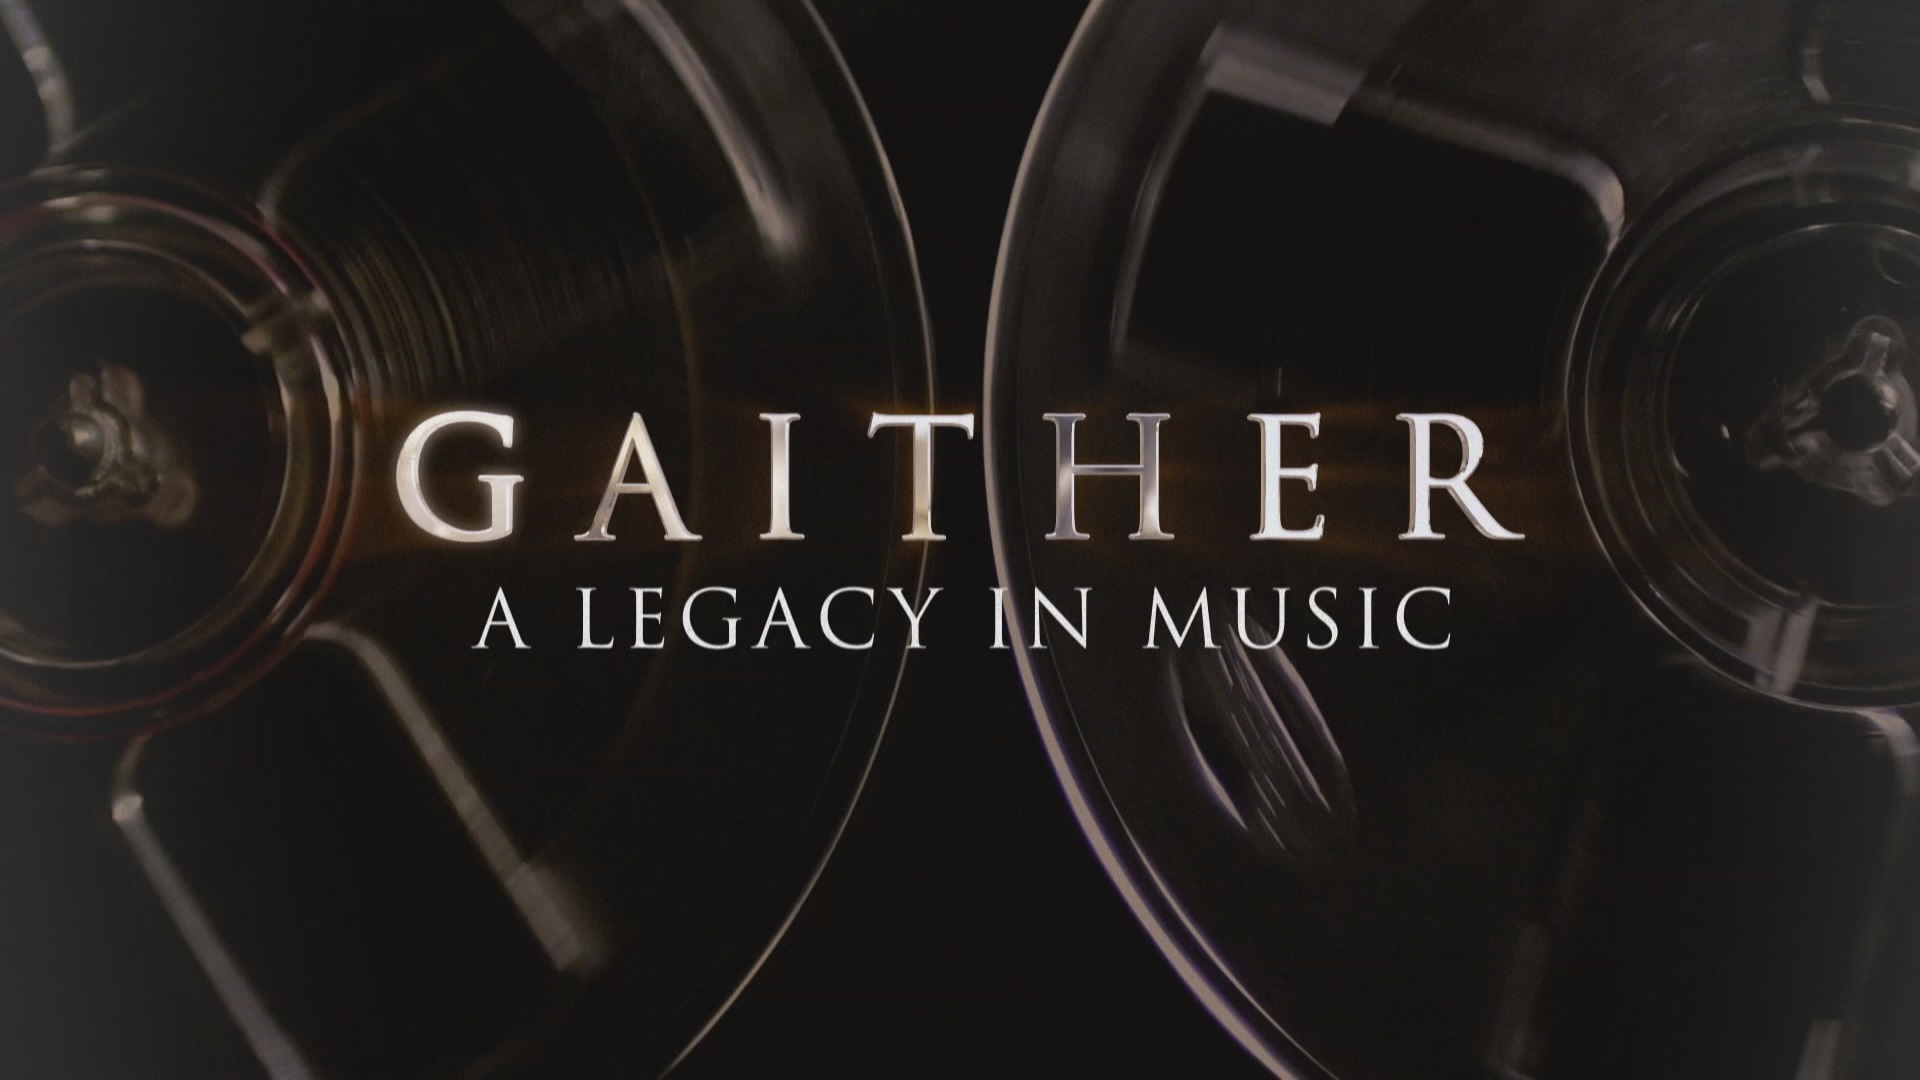 Gaither: A Legacy In Music